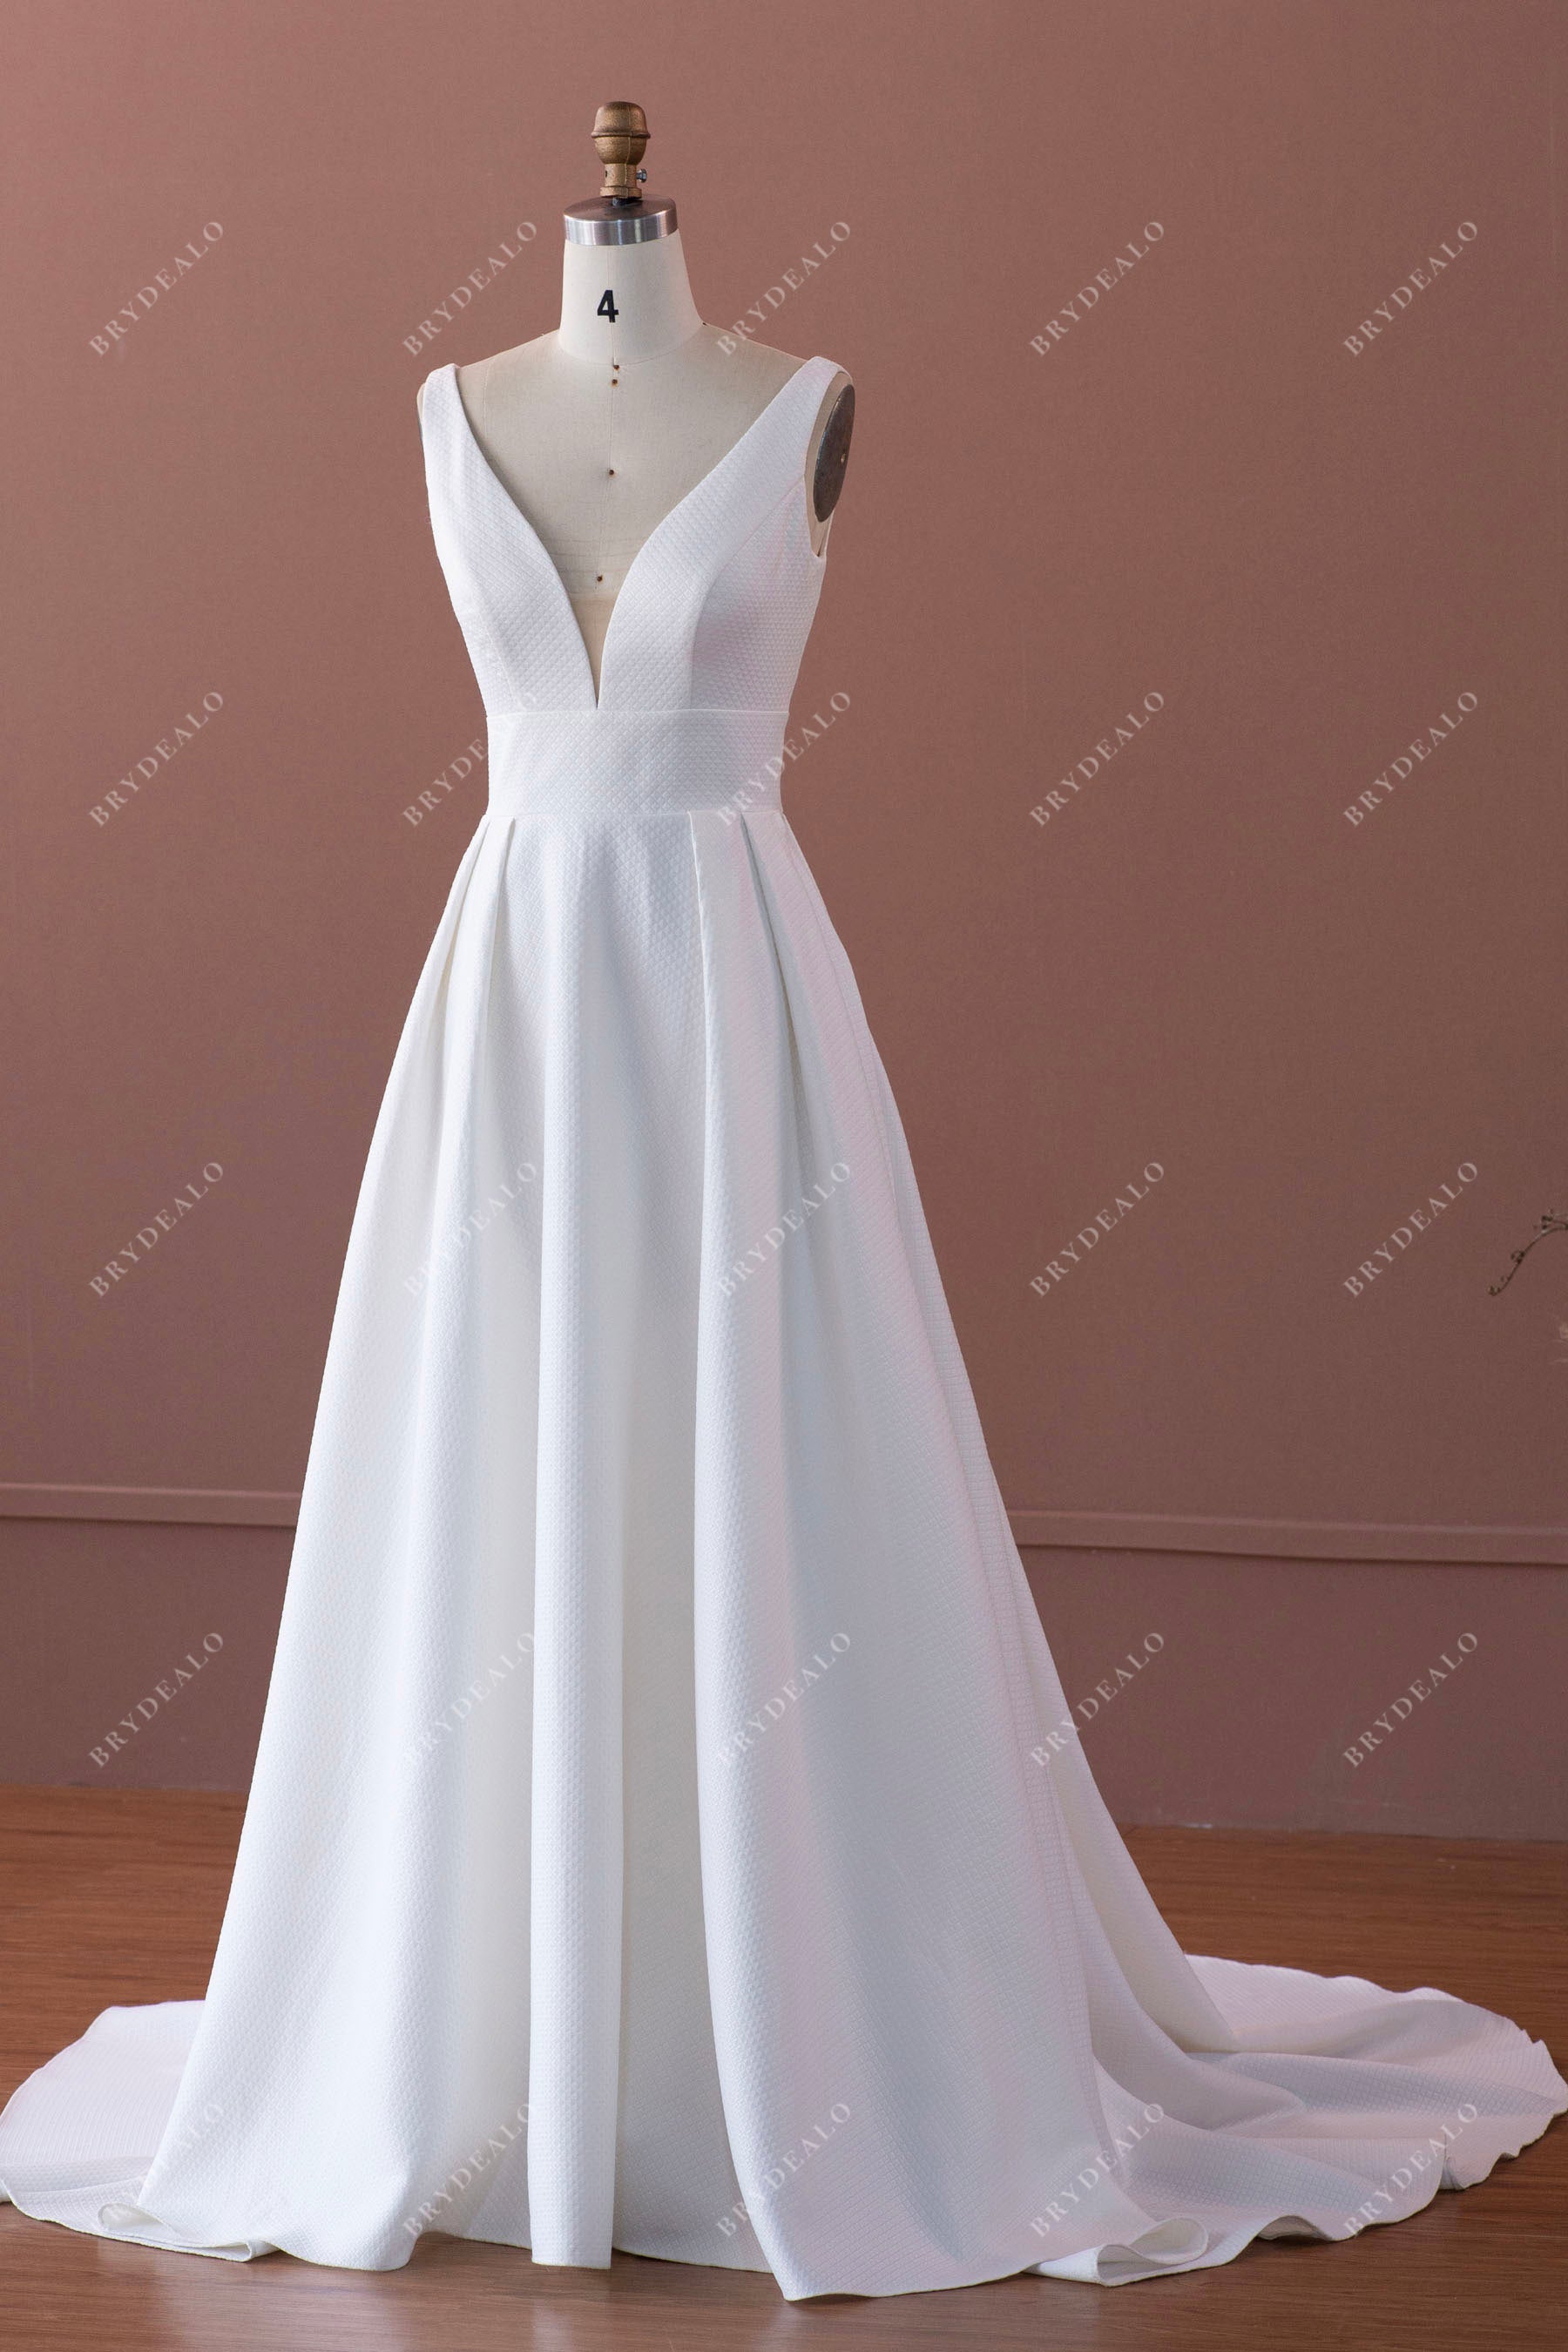 simple straps plunging A-line long wedding dress sample